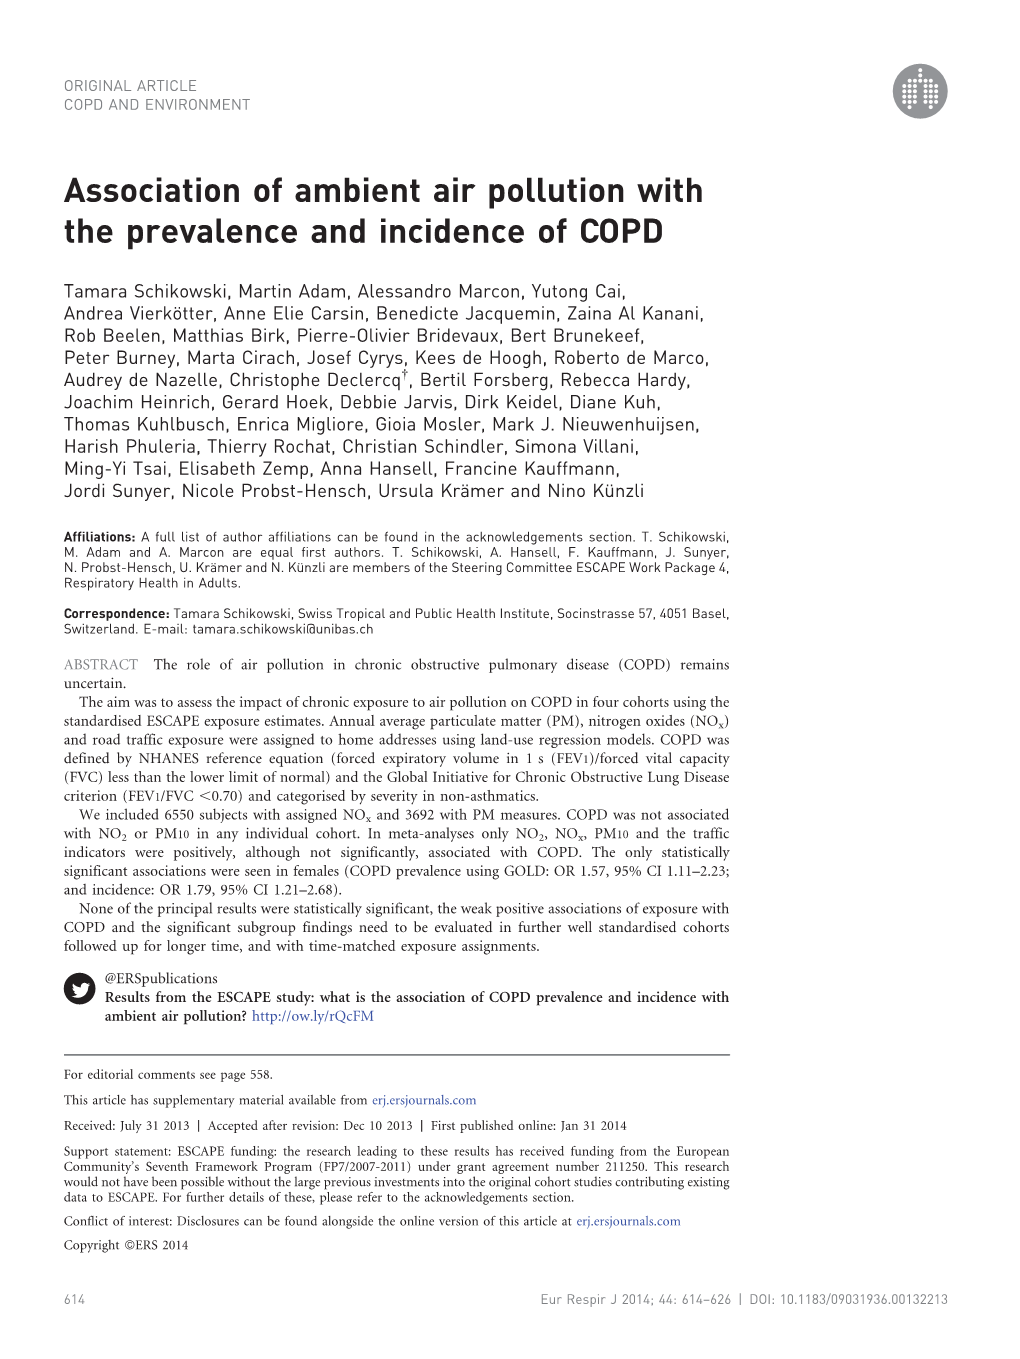 Association of Ambient Air Pollution with the Prevalence and Incidence of COPD